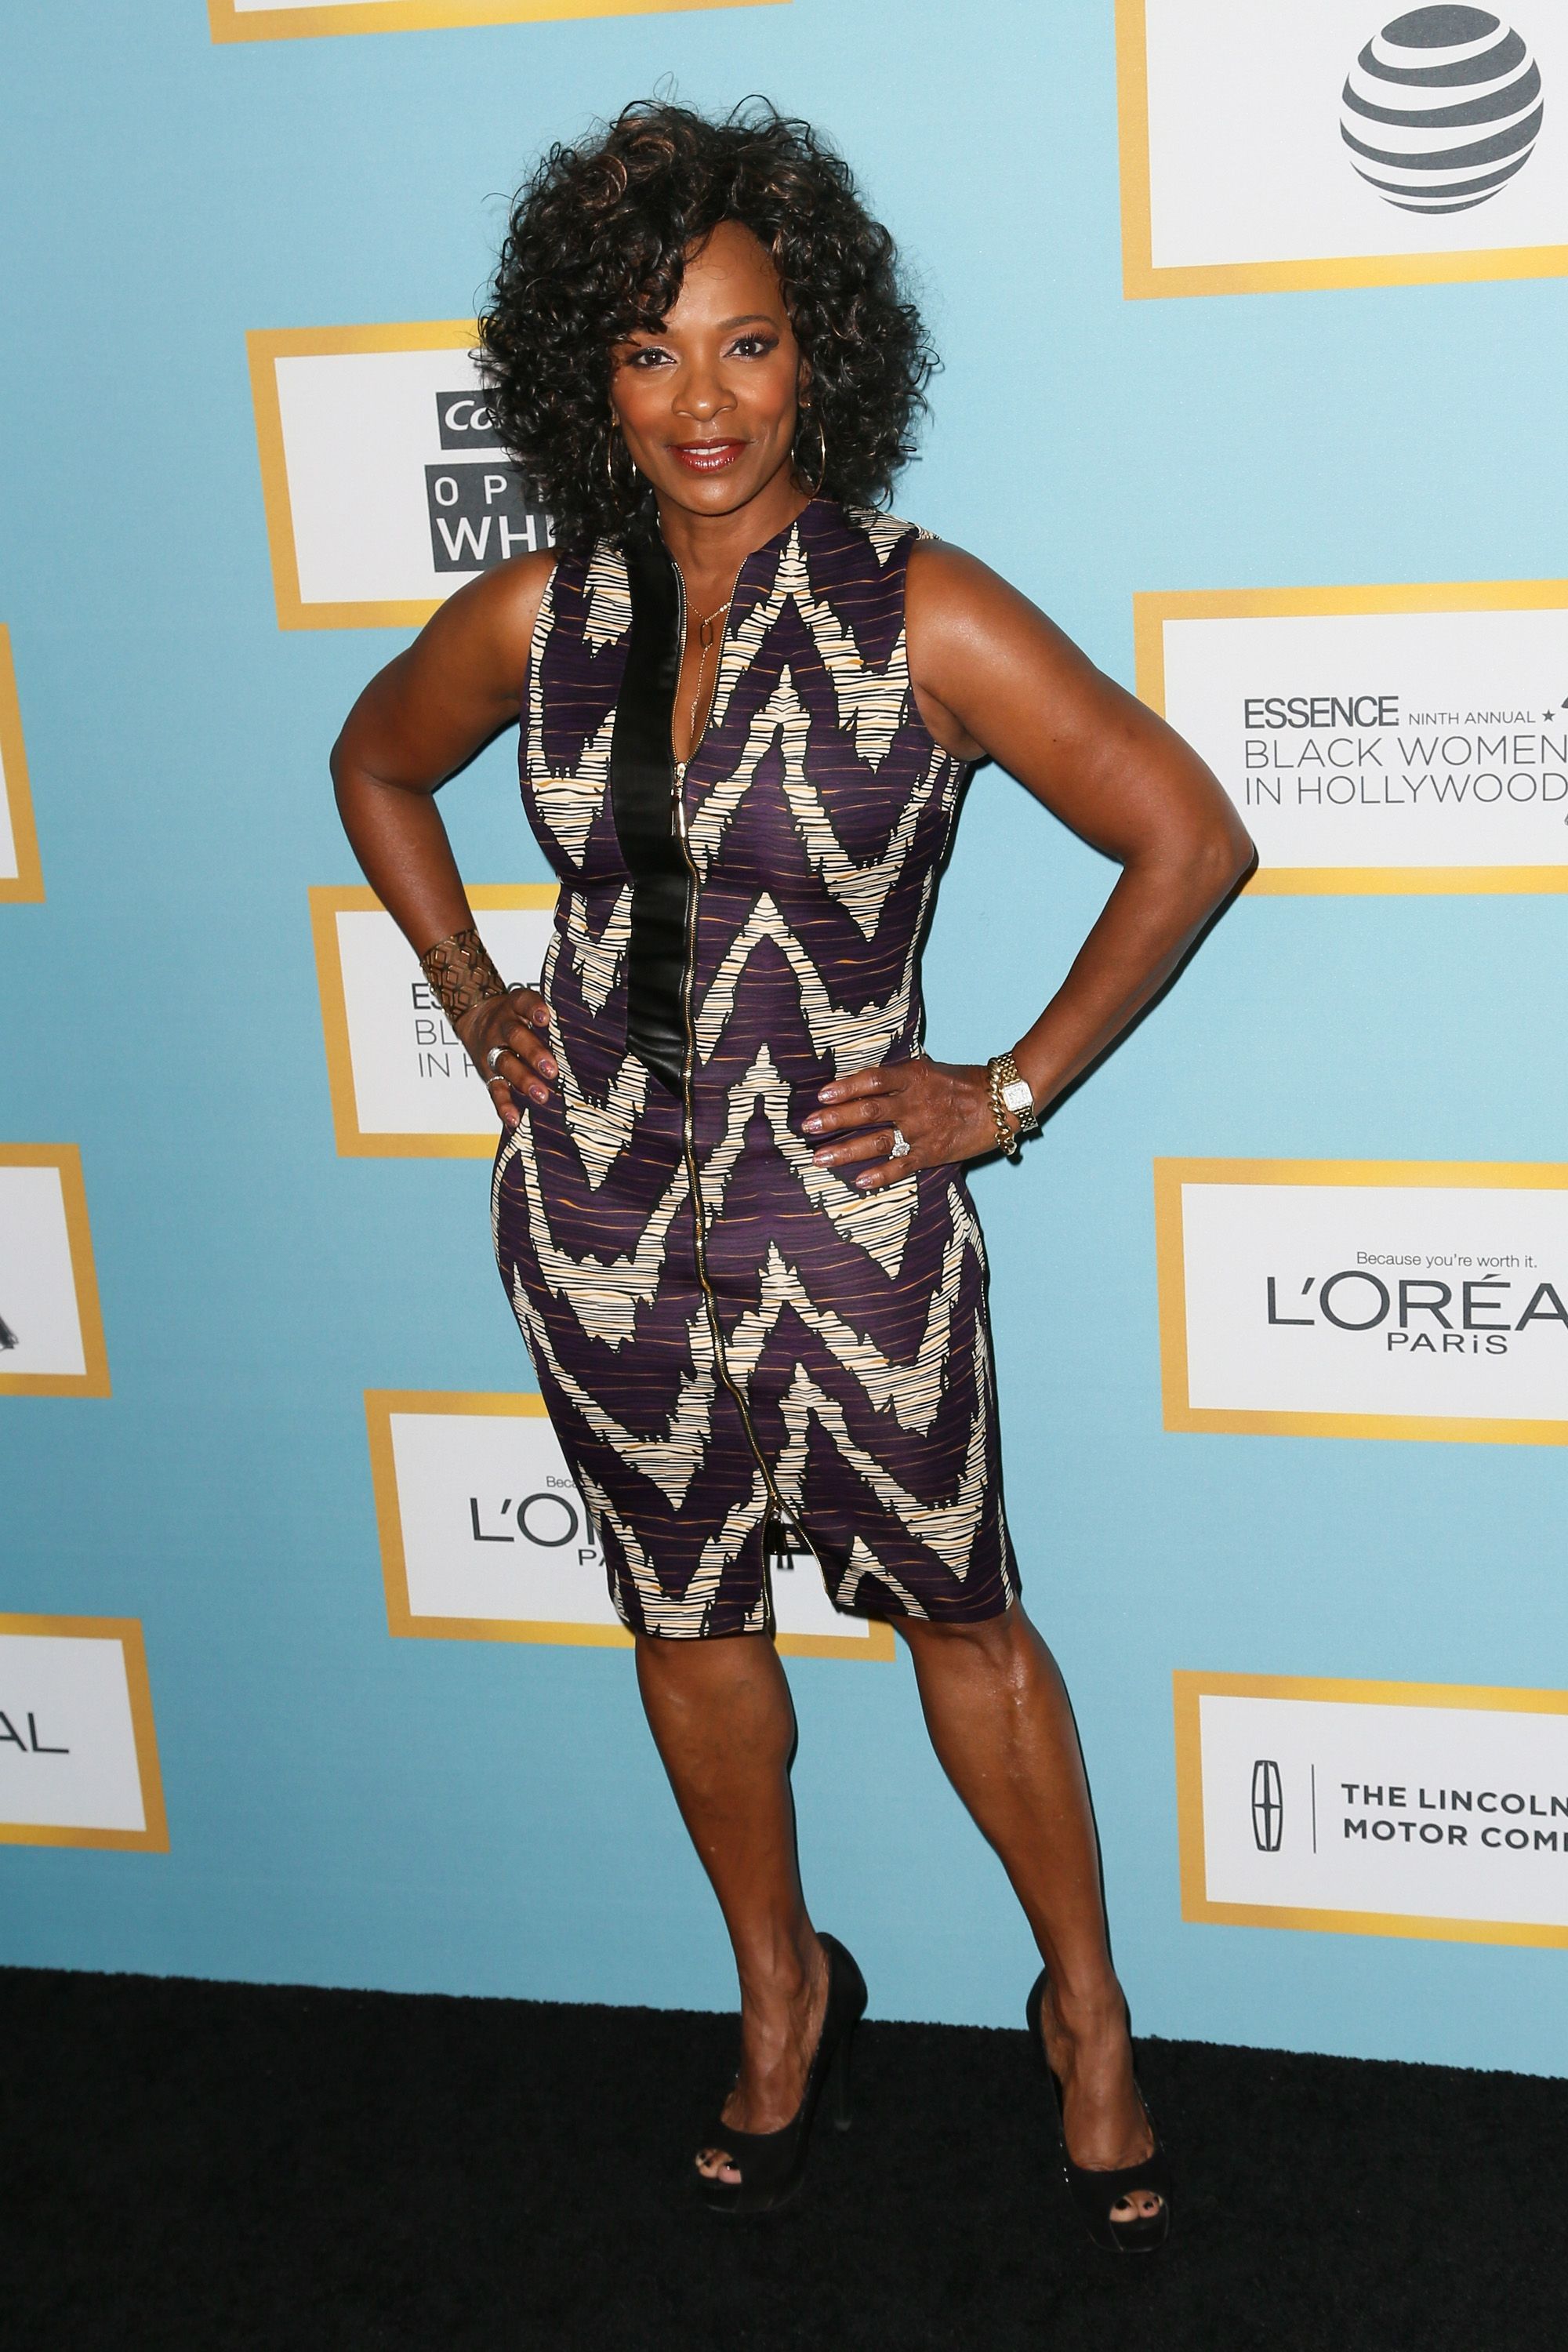 Vanessa Calloway at the Essence Annual Black Women event on February 25, 2016 in Beverly Hills. | Photo: Getty Images